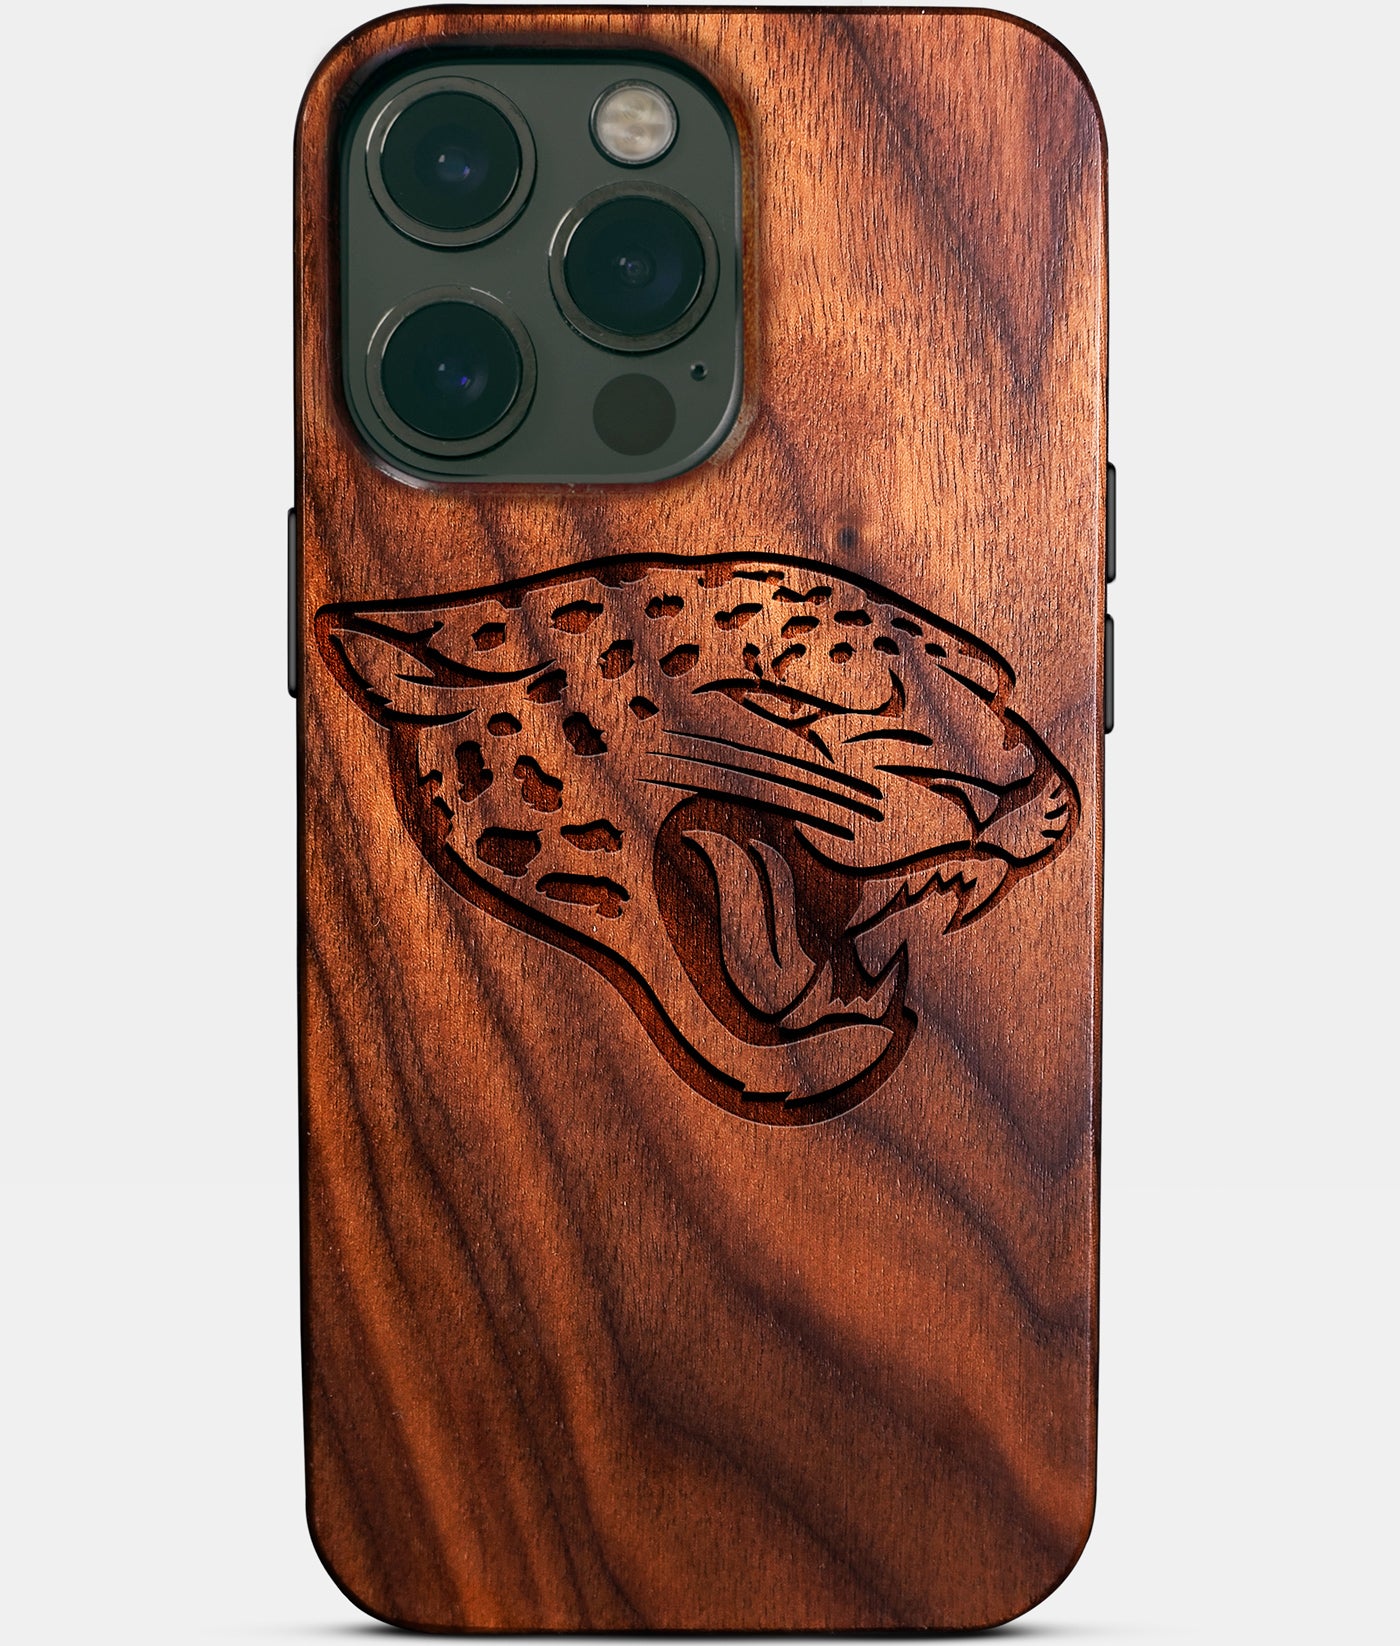 Custom Jacksonville Jaguars iPhone 14/14 Pro/14 Pro Max/14 Plus Case - Carved Wood Jaguars Cover - Eco-friendly Jacksonville Jaguars iPhone 14 Case - Custom Jacksonville Jaguars Gift For Him - Monogrammed Personalized iPhone 14 Cover By Engraved In Nature